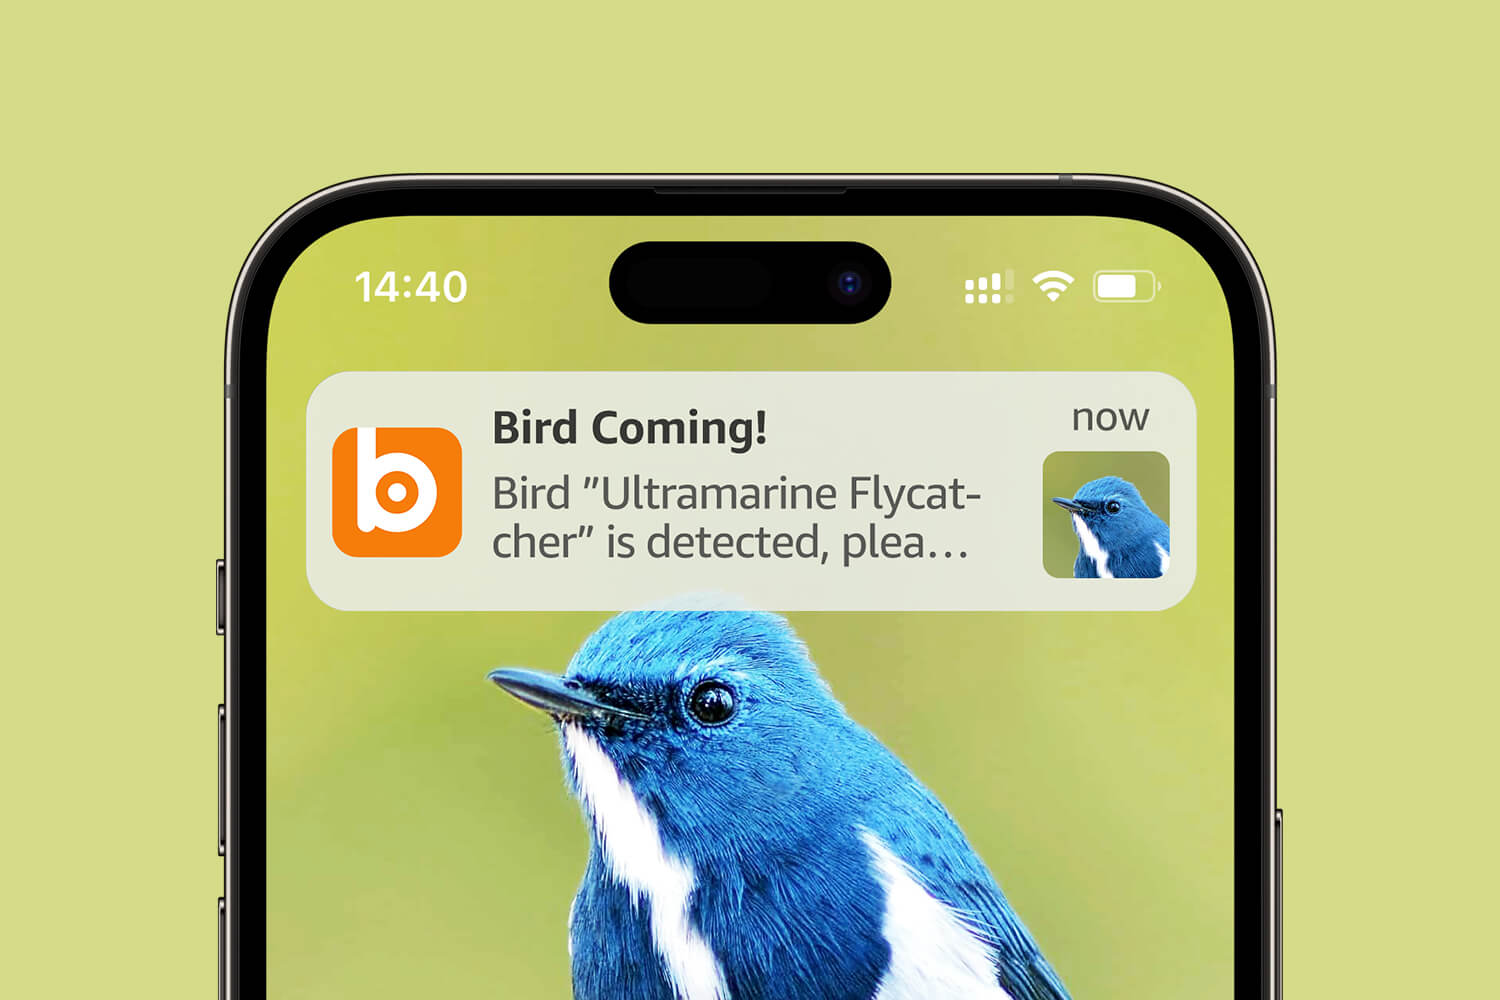 Bilantan BirdHi, Receive timely notifications whenever birds visit, So you won't miss any birds that make you smile.